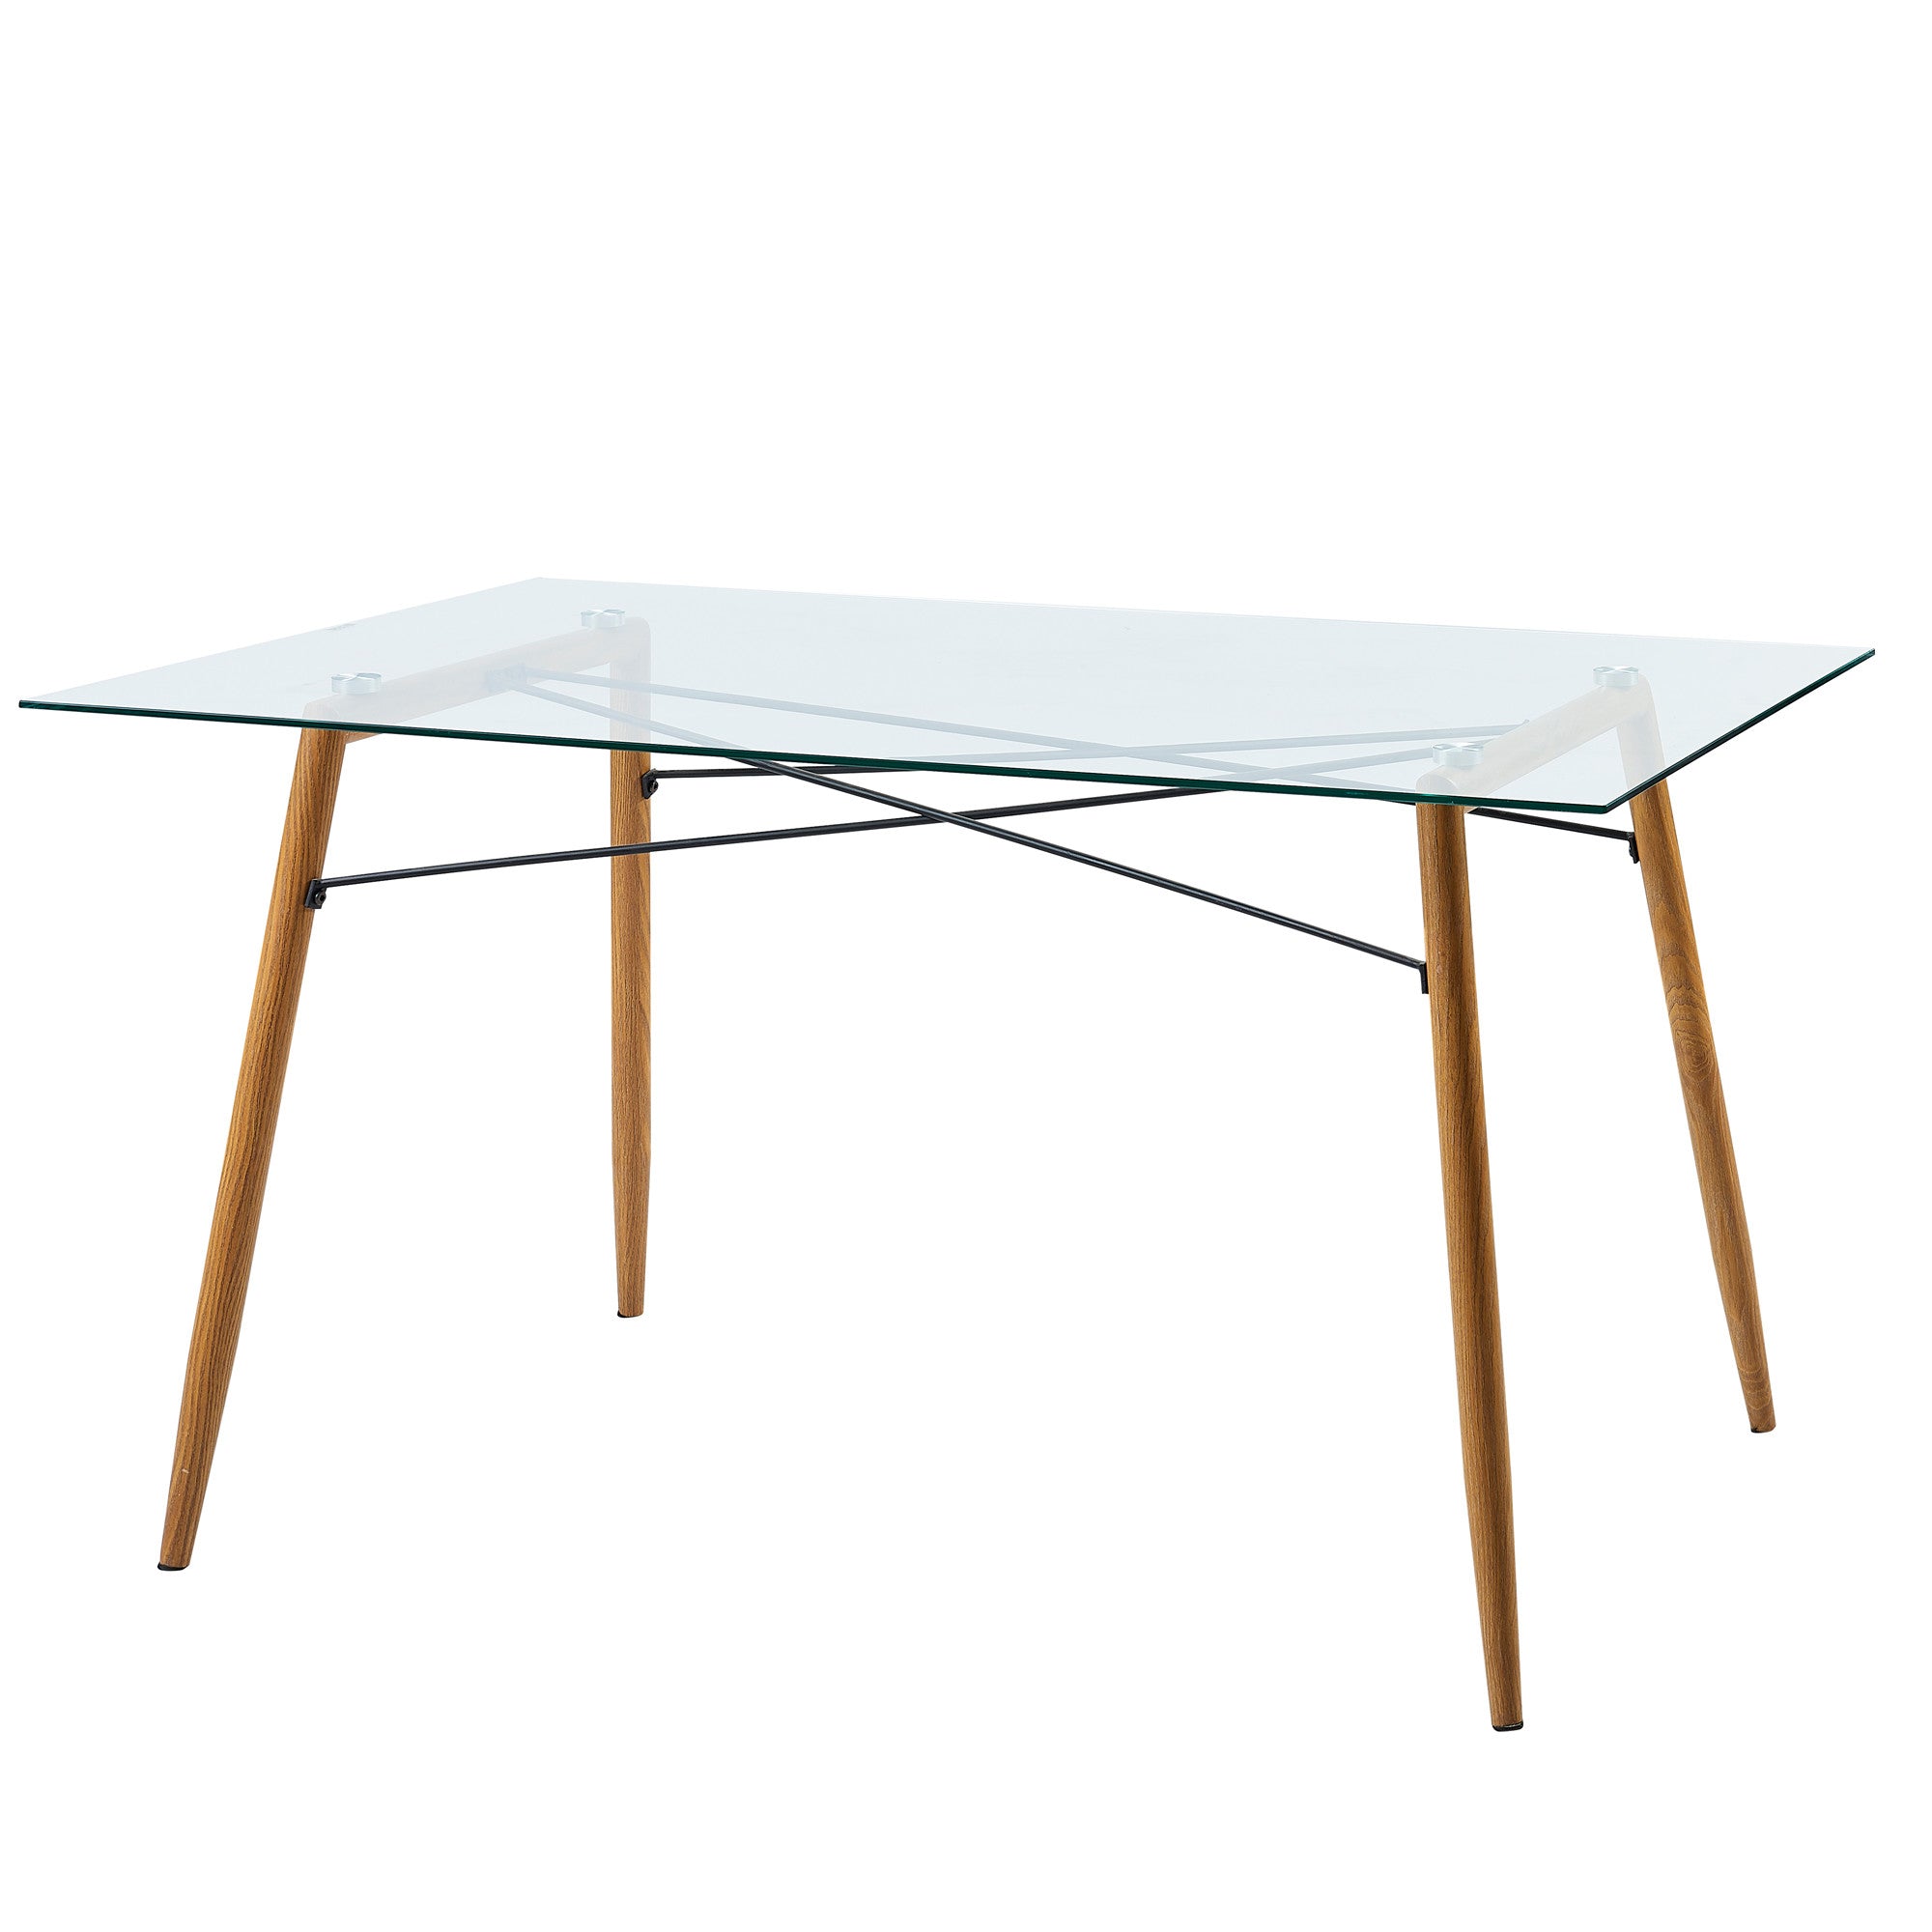 Teamson Home Minimalist Glass Top Dining Table with Wood Base, Natural